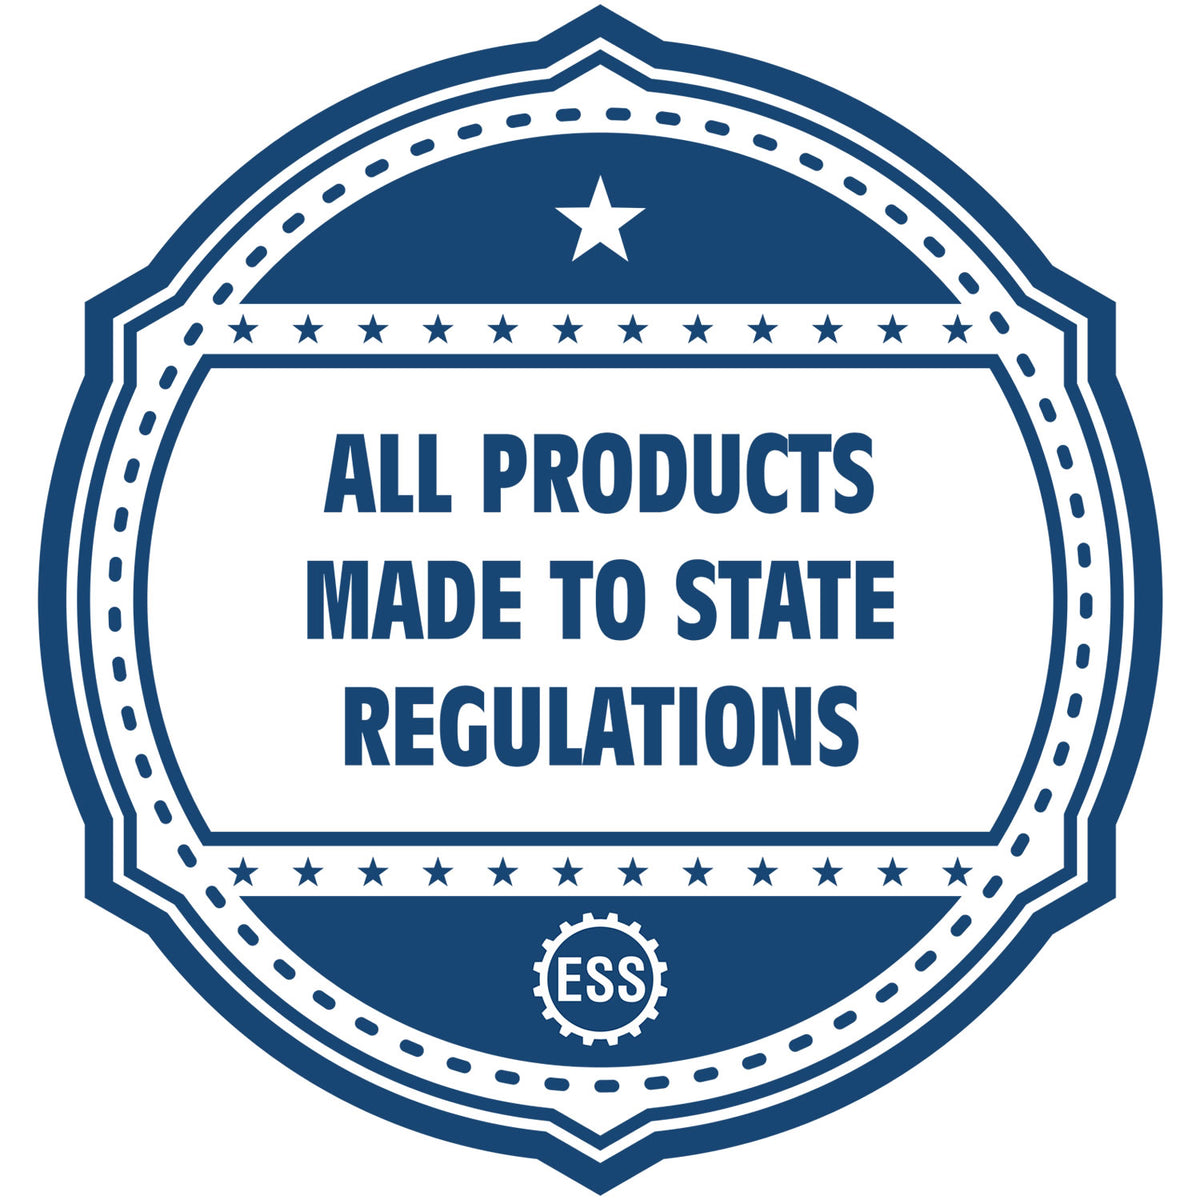 An icon or badge element for the Guam Landscape Architectural Seal Stamp showing that this product is made in compliance with state regulations.